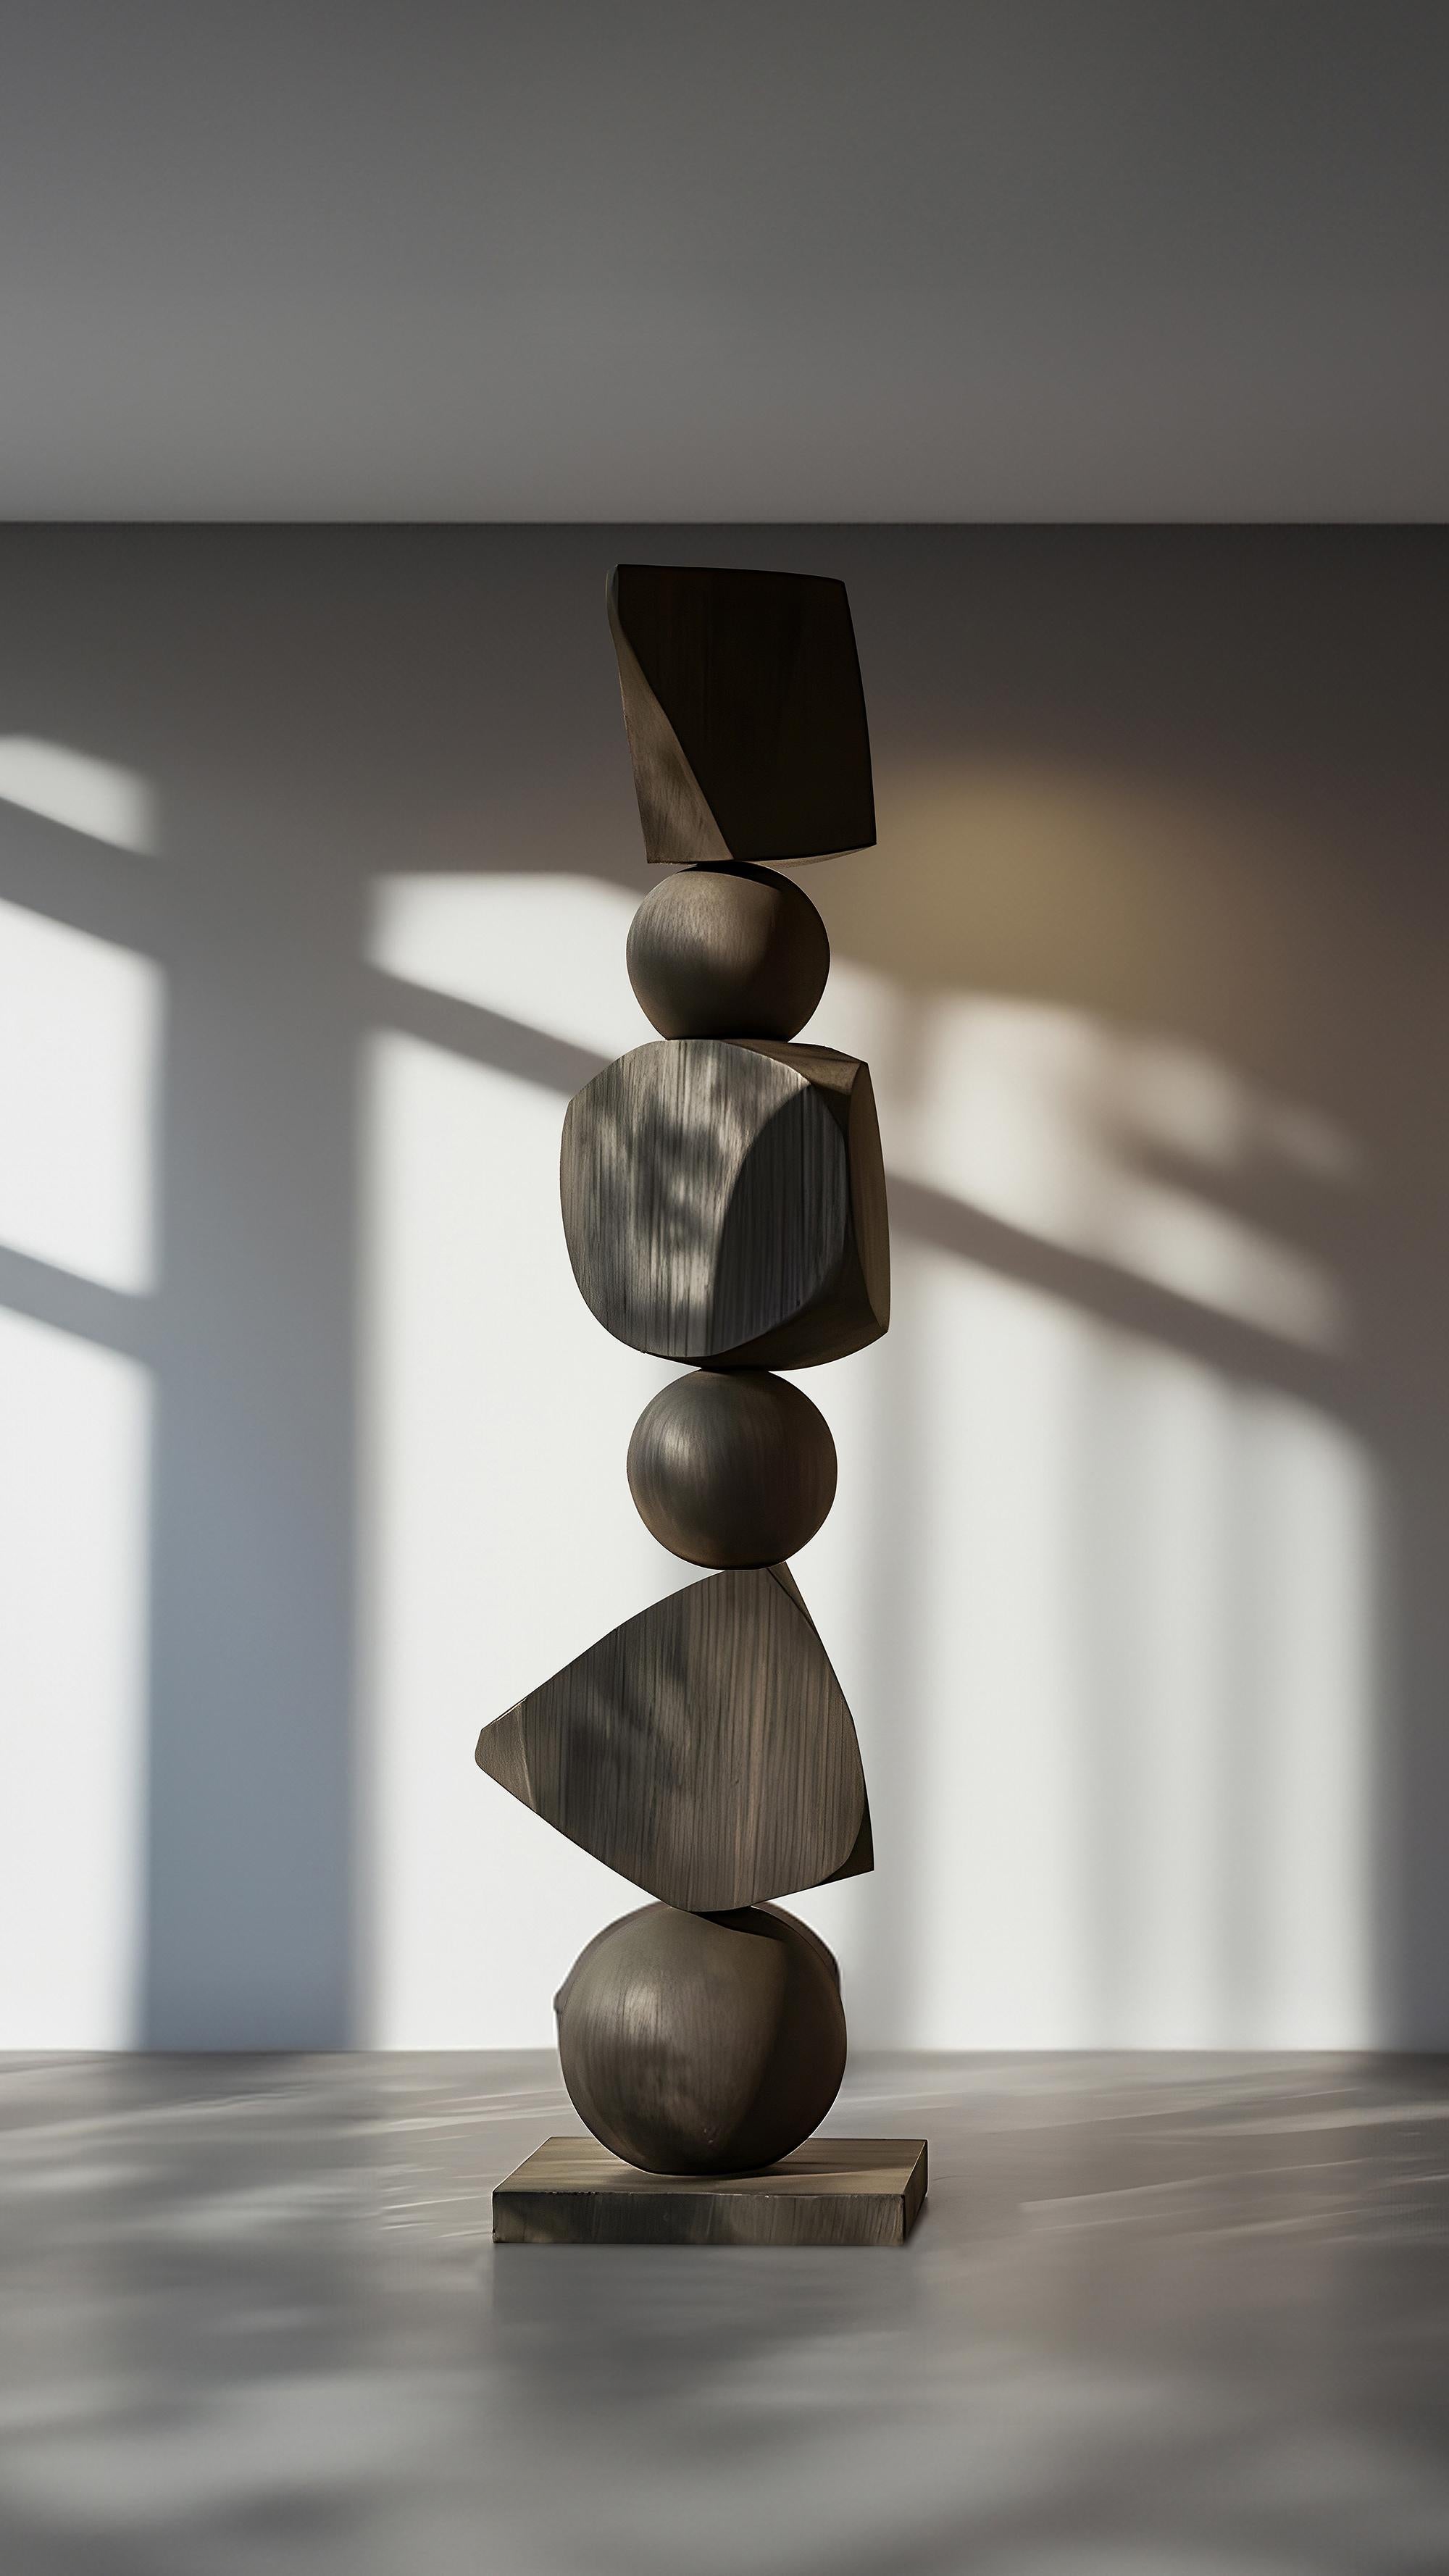 Hand-Crafted The Abstract Elegance of Burned Oak, Dark and Sleek, by Escalona, Still Stand 98 For Sale